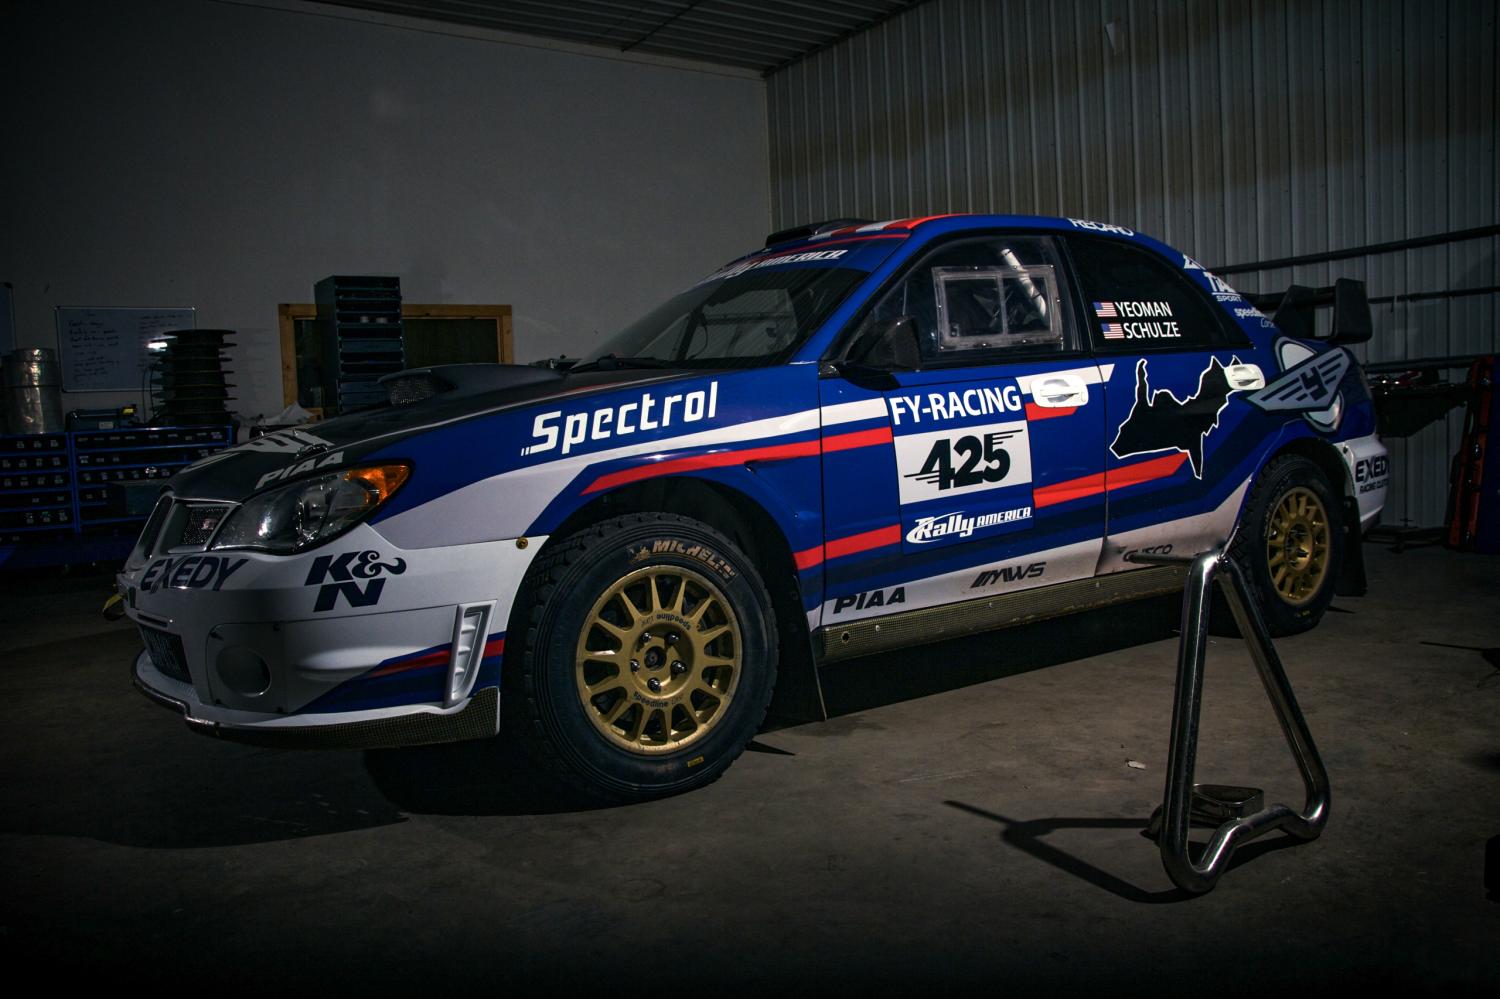 Seibon Carbon Team FY Racing Launches New Livery on STI Race Car